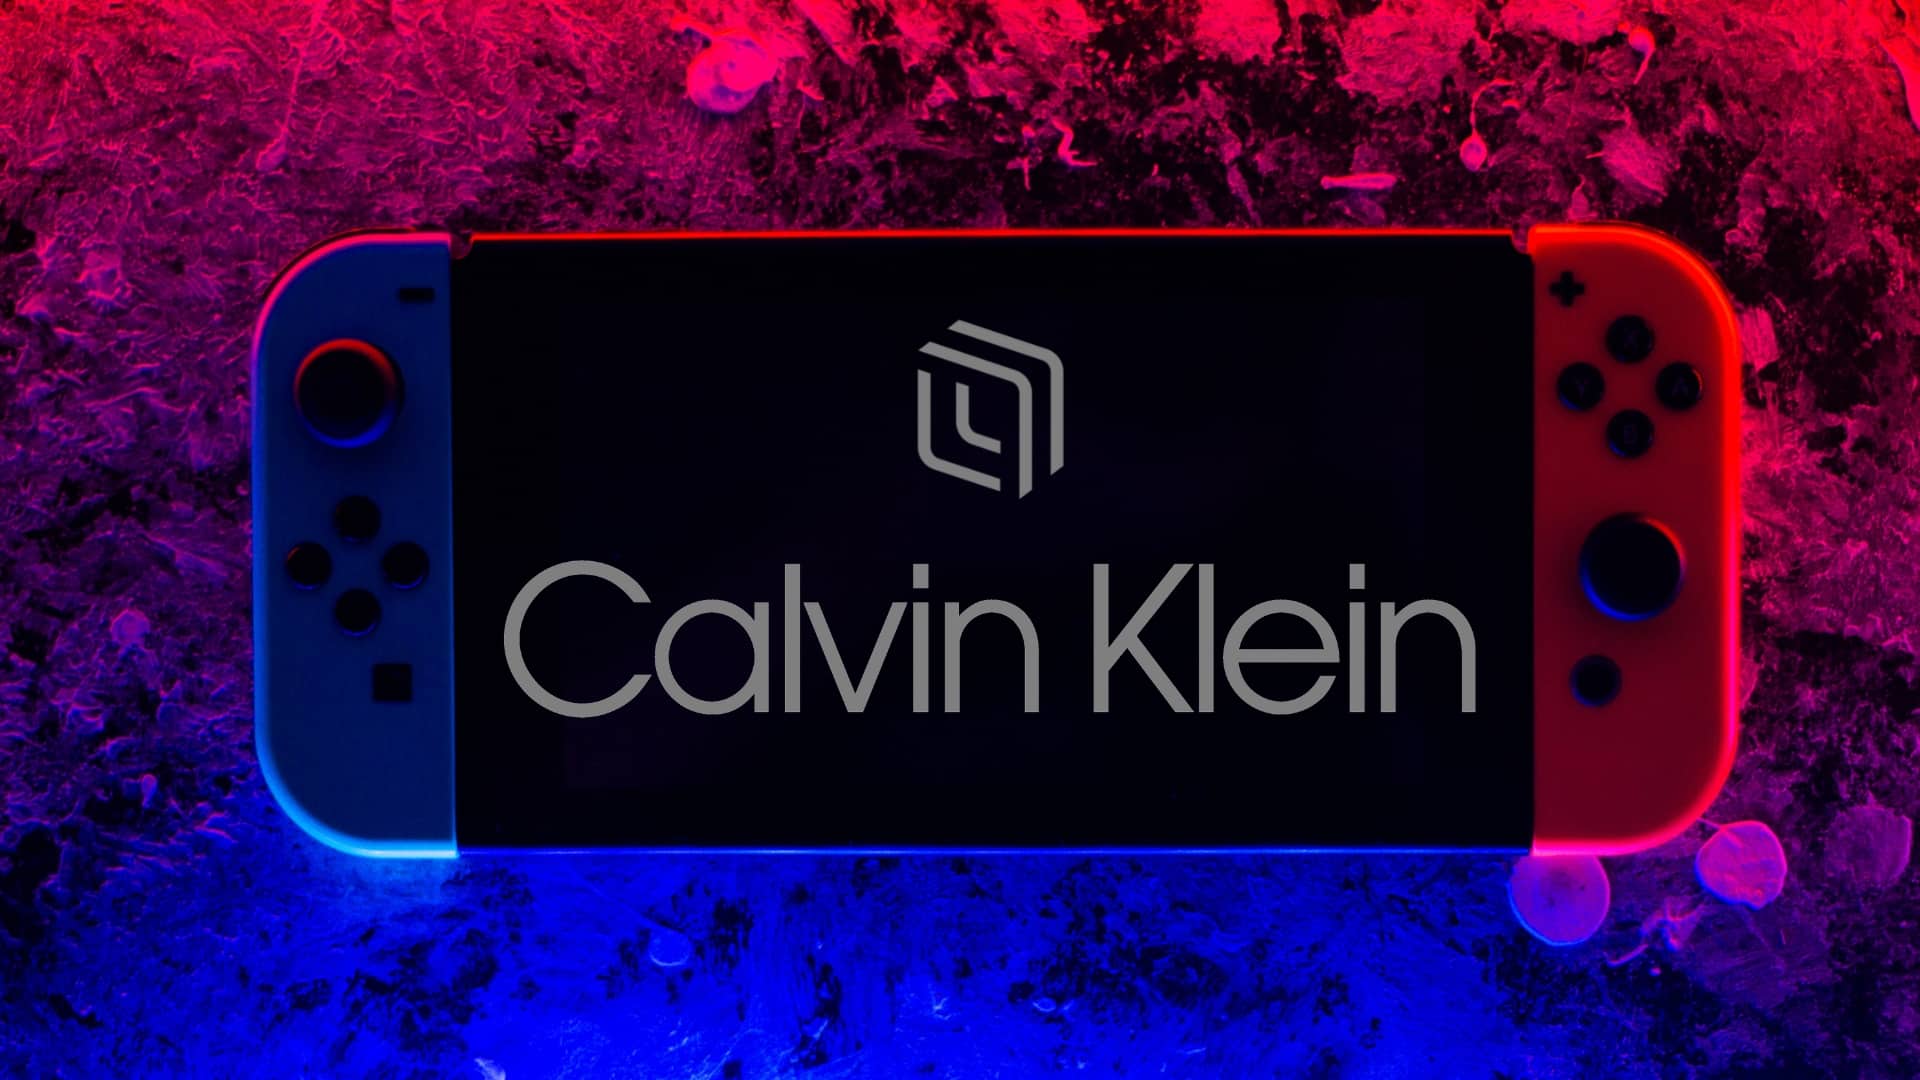 Calvin Klein Launches A Gaming Experience With Ready Player Me   - P2E NFT Games Portal